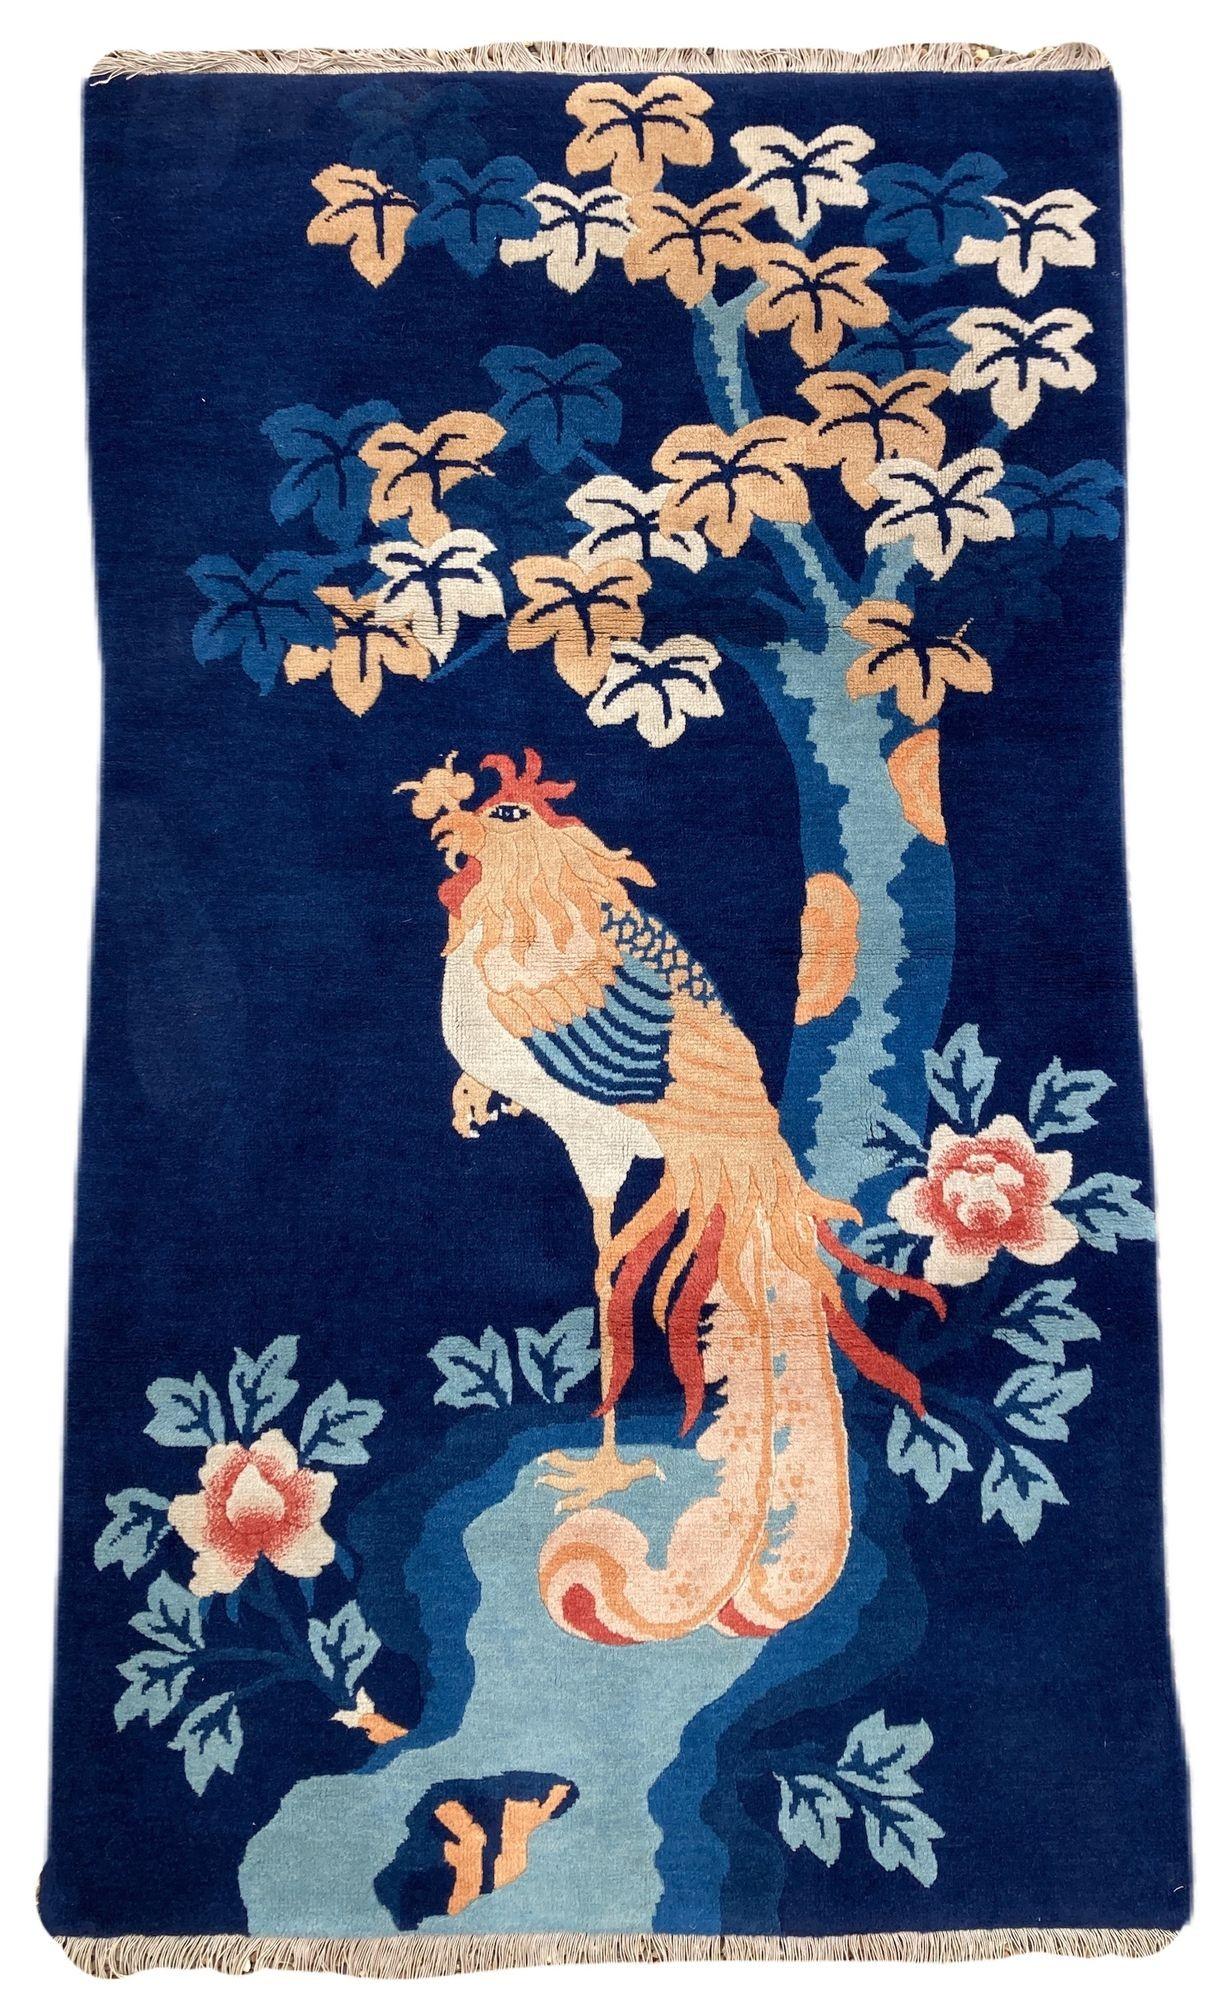 A lovely vintage Pao-Tao rug, handwoven in China circa 1940. The design features a single Fenghuang bird in front of a flowering tree on a deep indigo field. This mythical bird is an auspicious symbol representing high virtue and grace and heralds